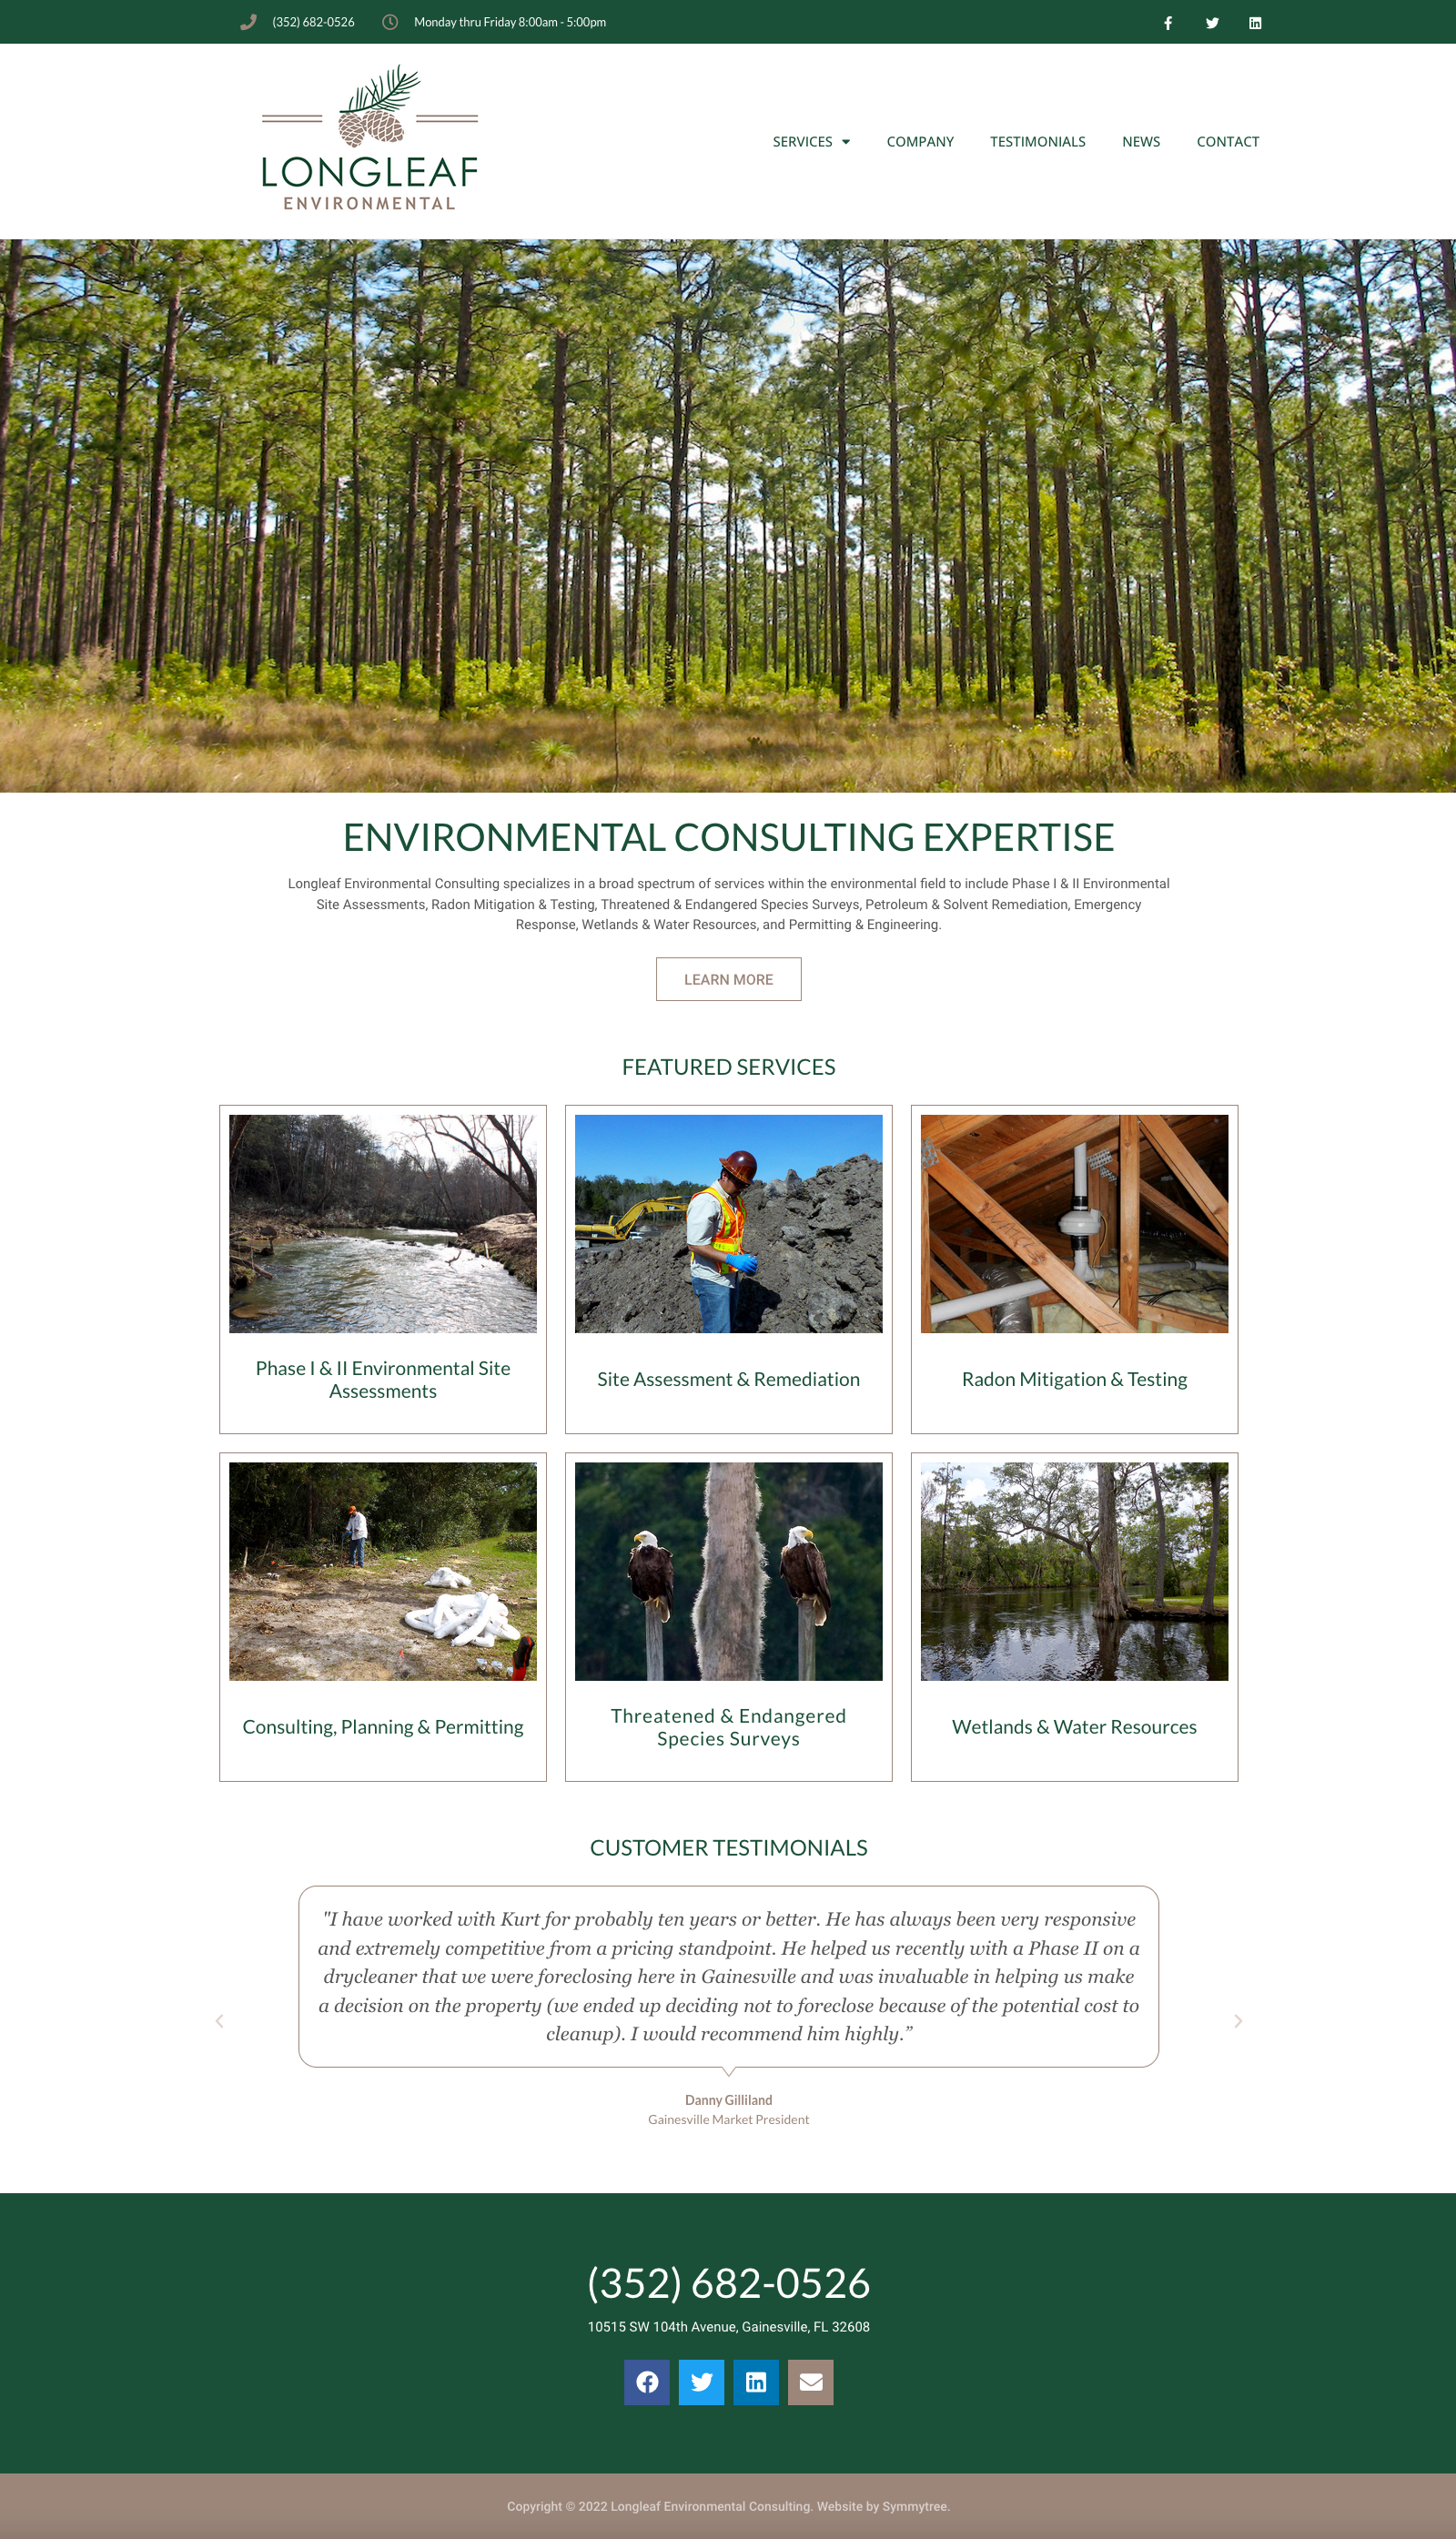 Longleaf Environmental Consulting